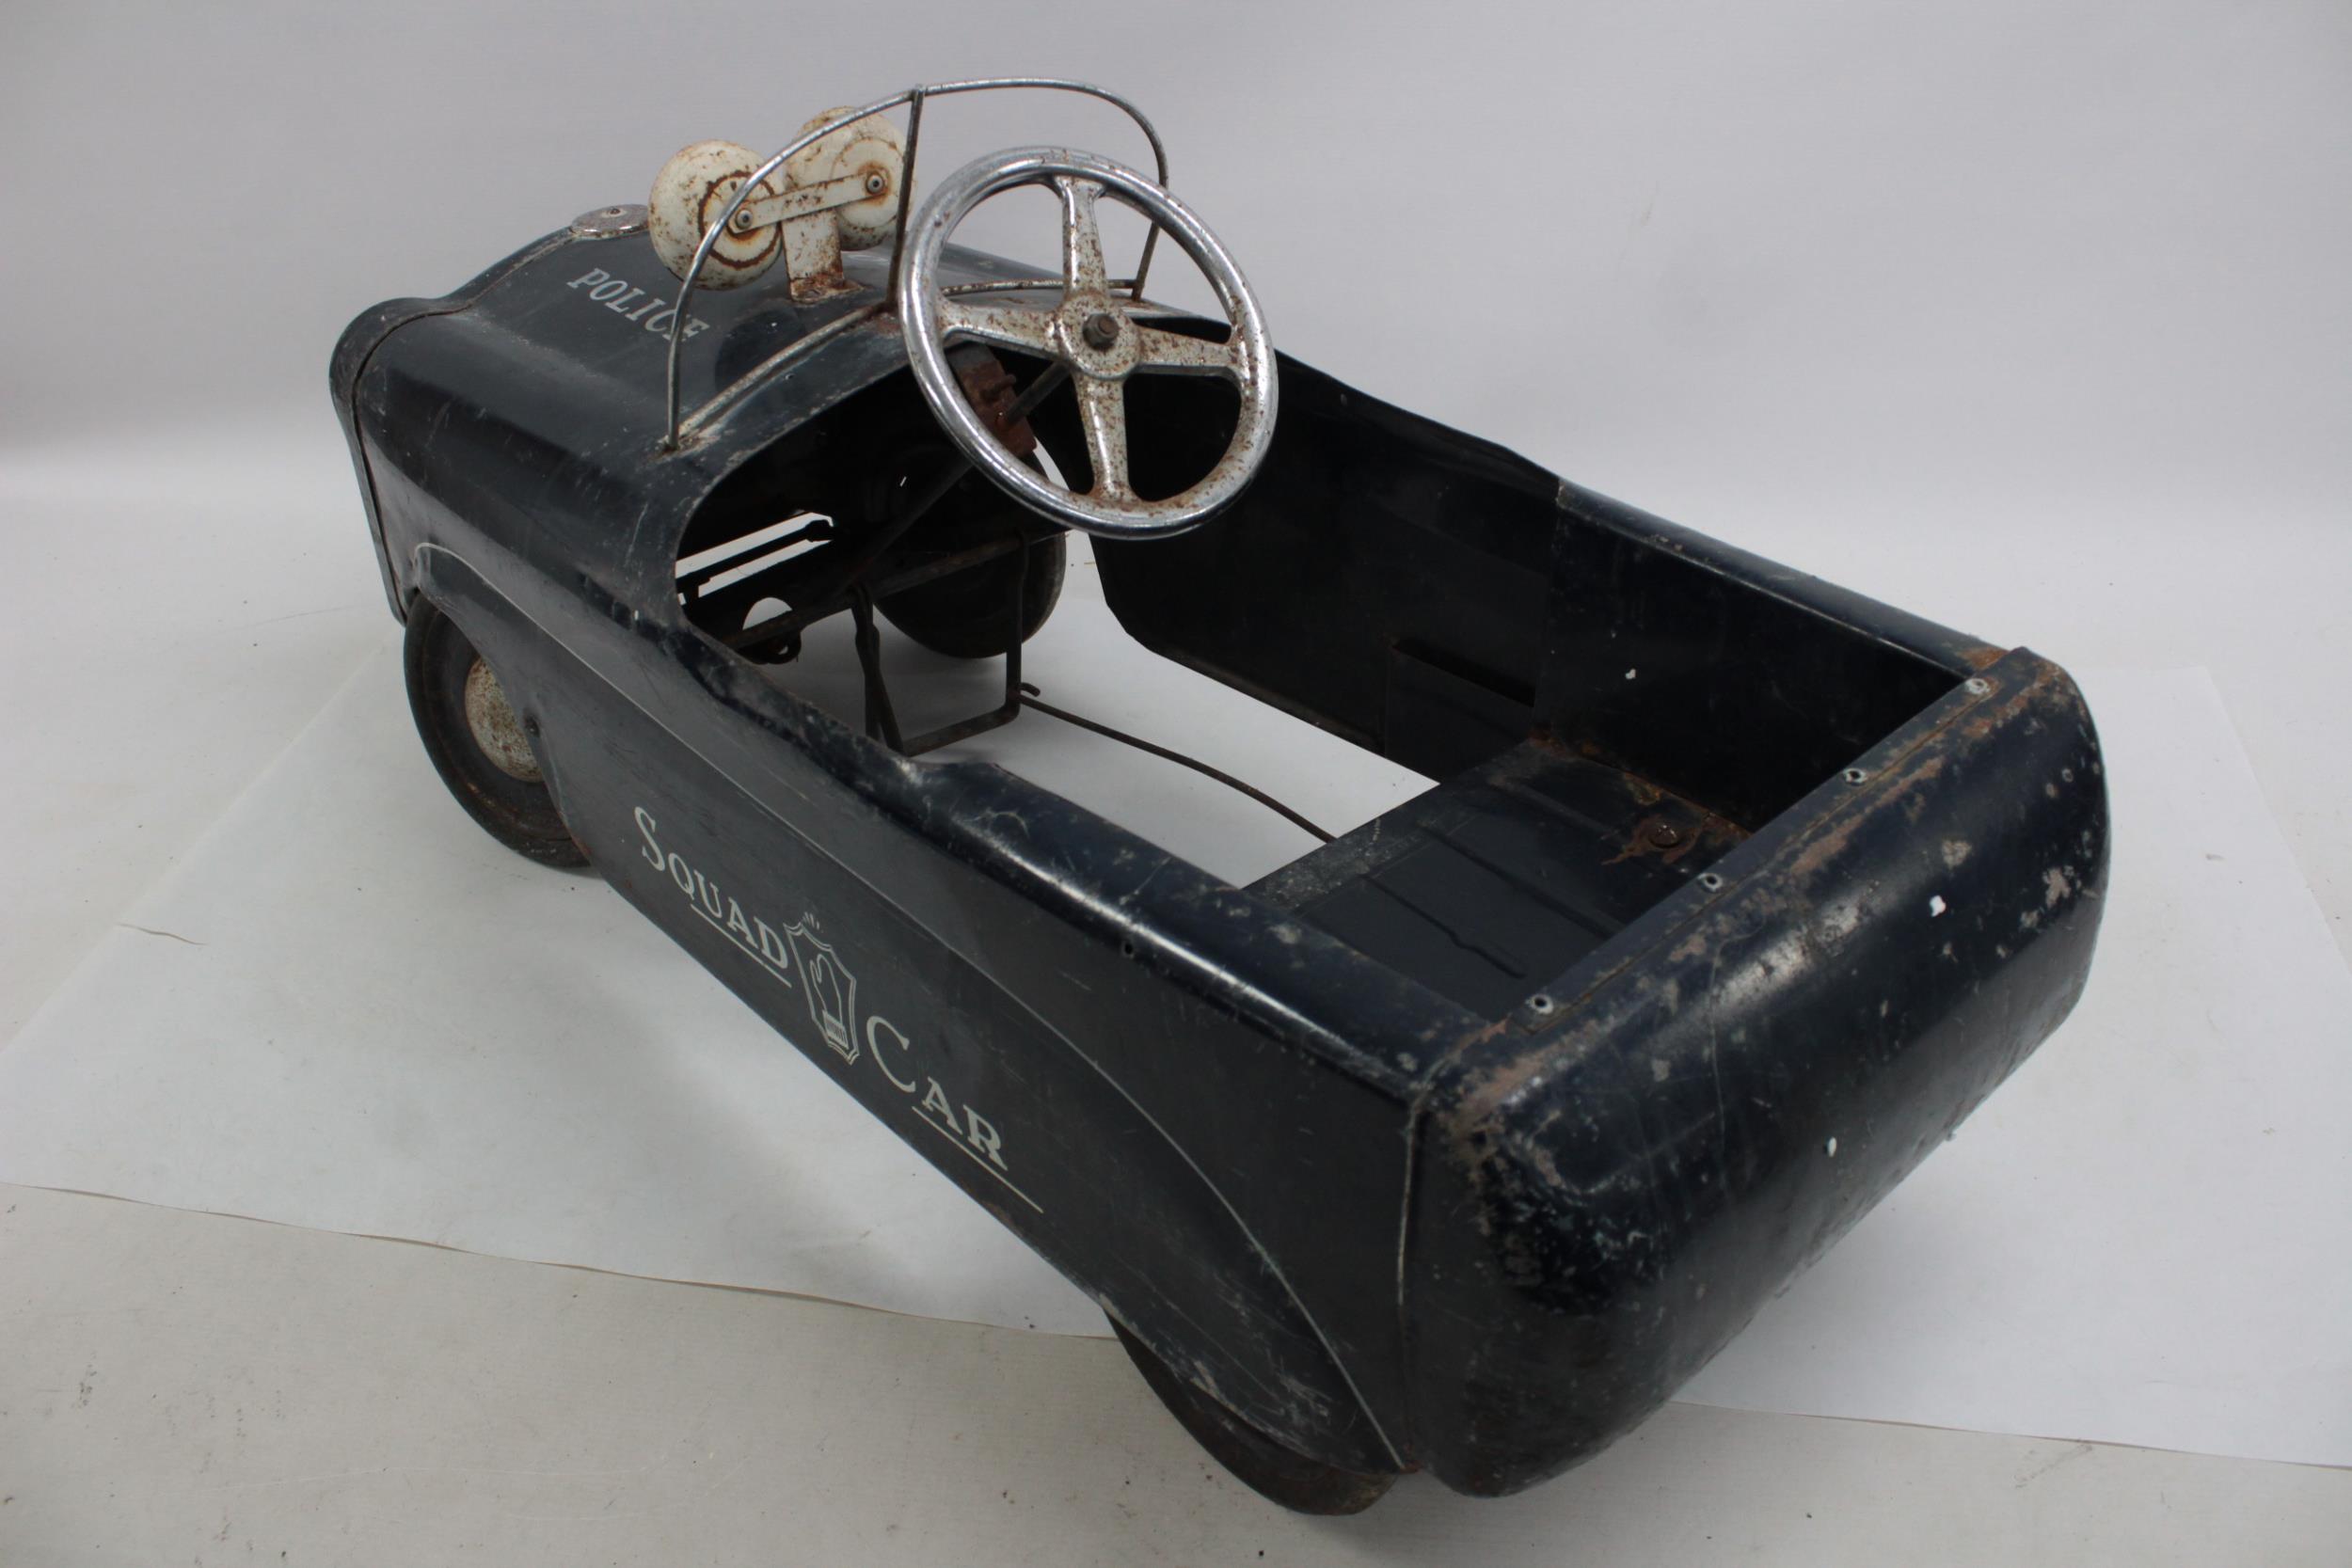 Vintage TRIANG Children's Police Pedal Car In Original Condition - Image 5 of 7